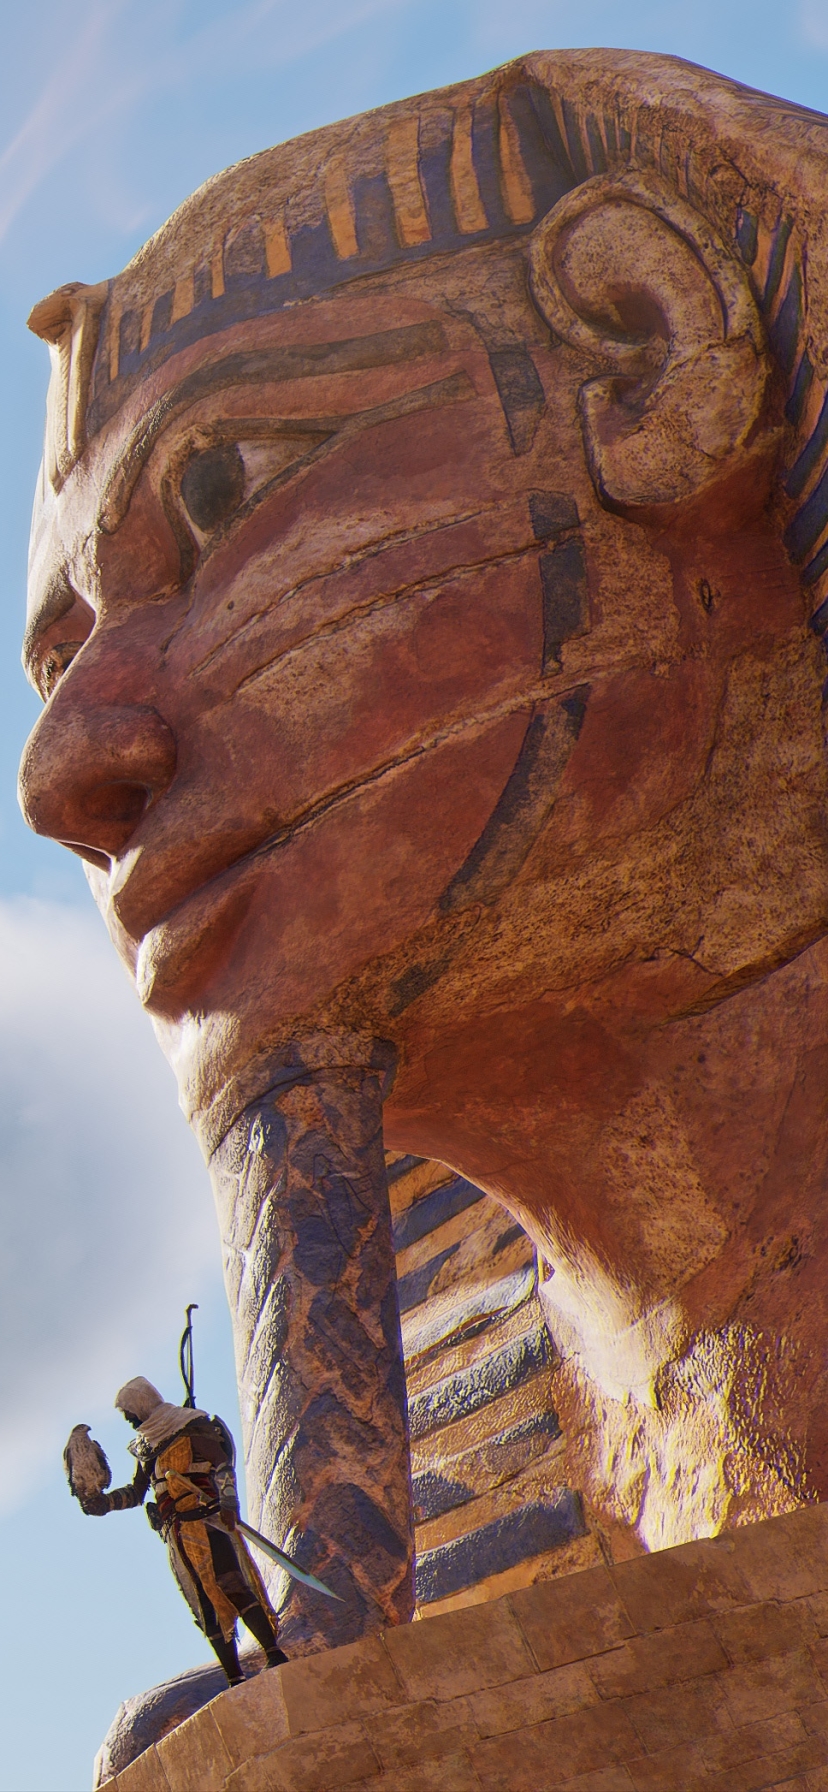 video game, assassin's creed origins, sphinx, bayek of siwa, assassin's creed mobile wallpaper